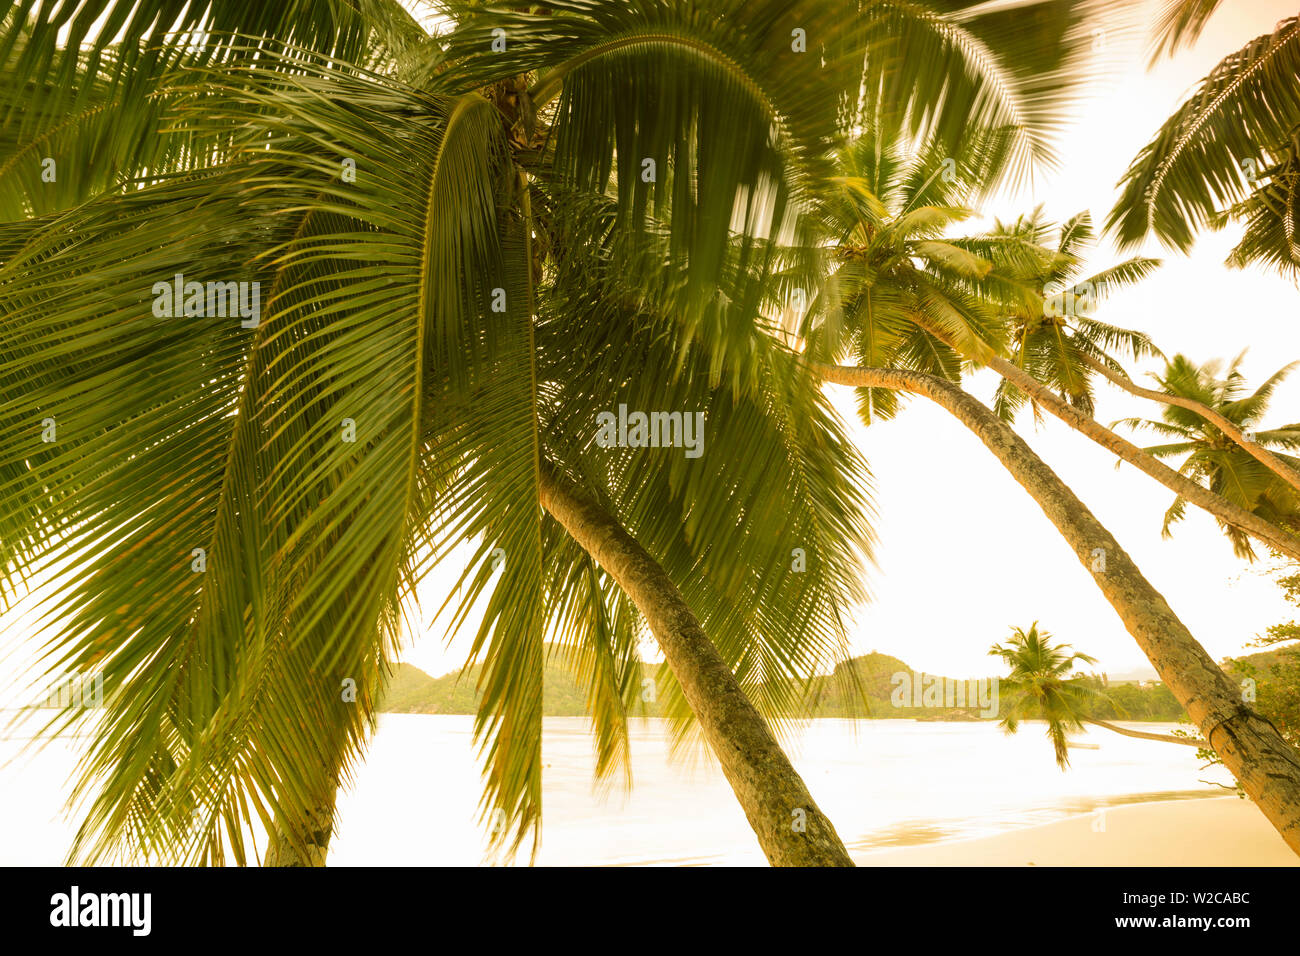 Palm trees and tropical beach, southern Mahe, Seychelles Stock Photo